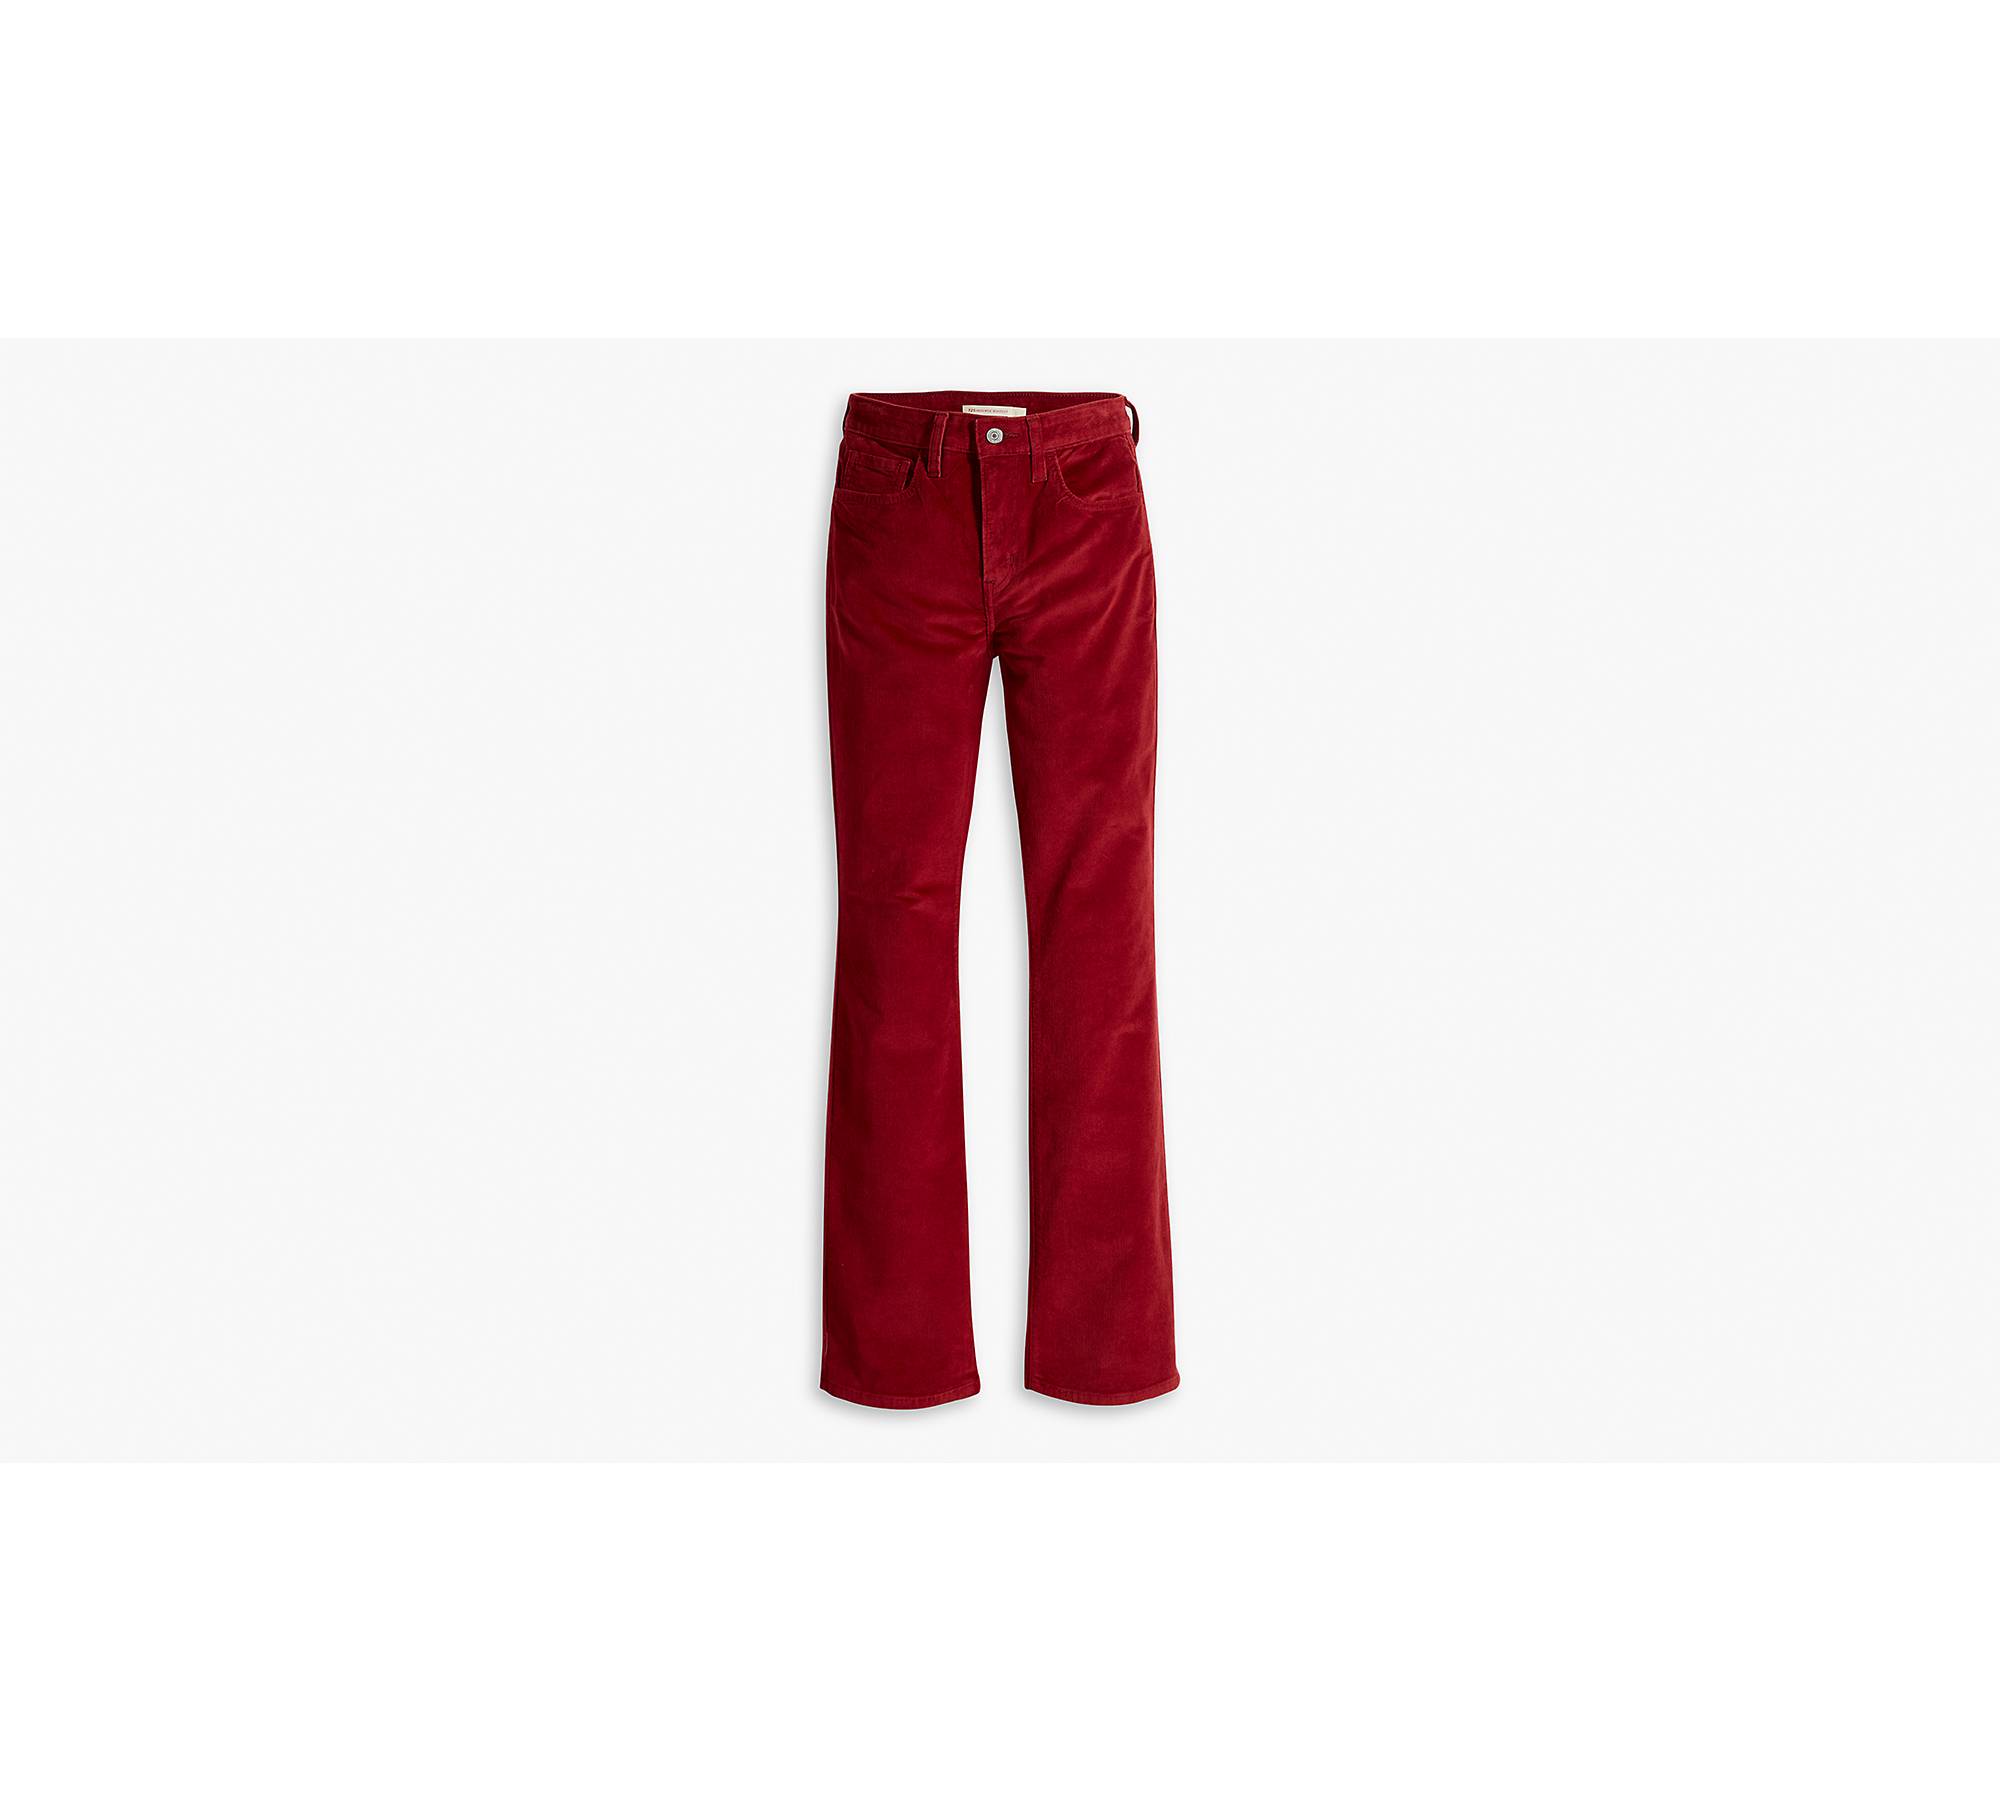 Low Rise Bootleg Jeans in Cord Maroon